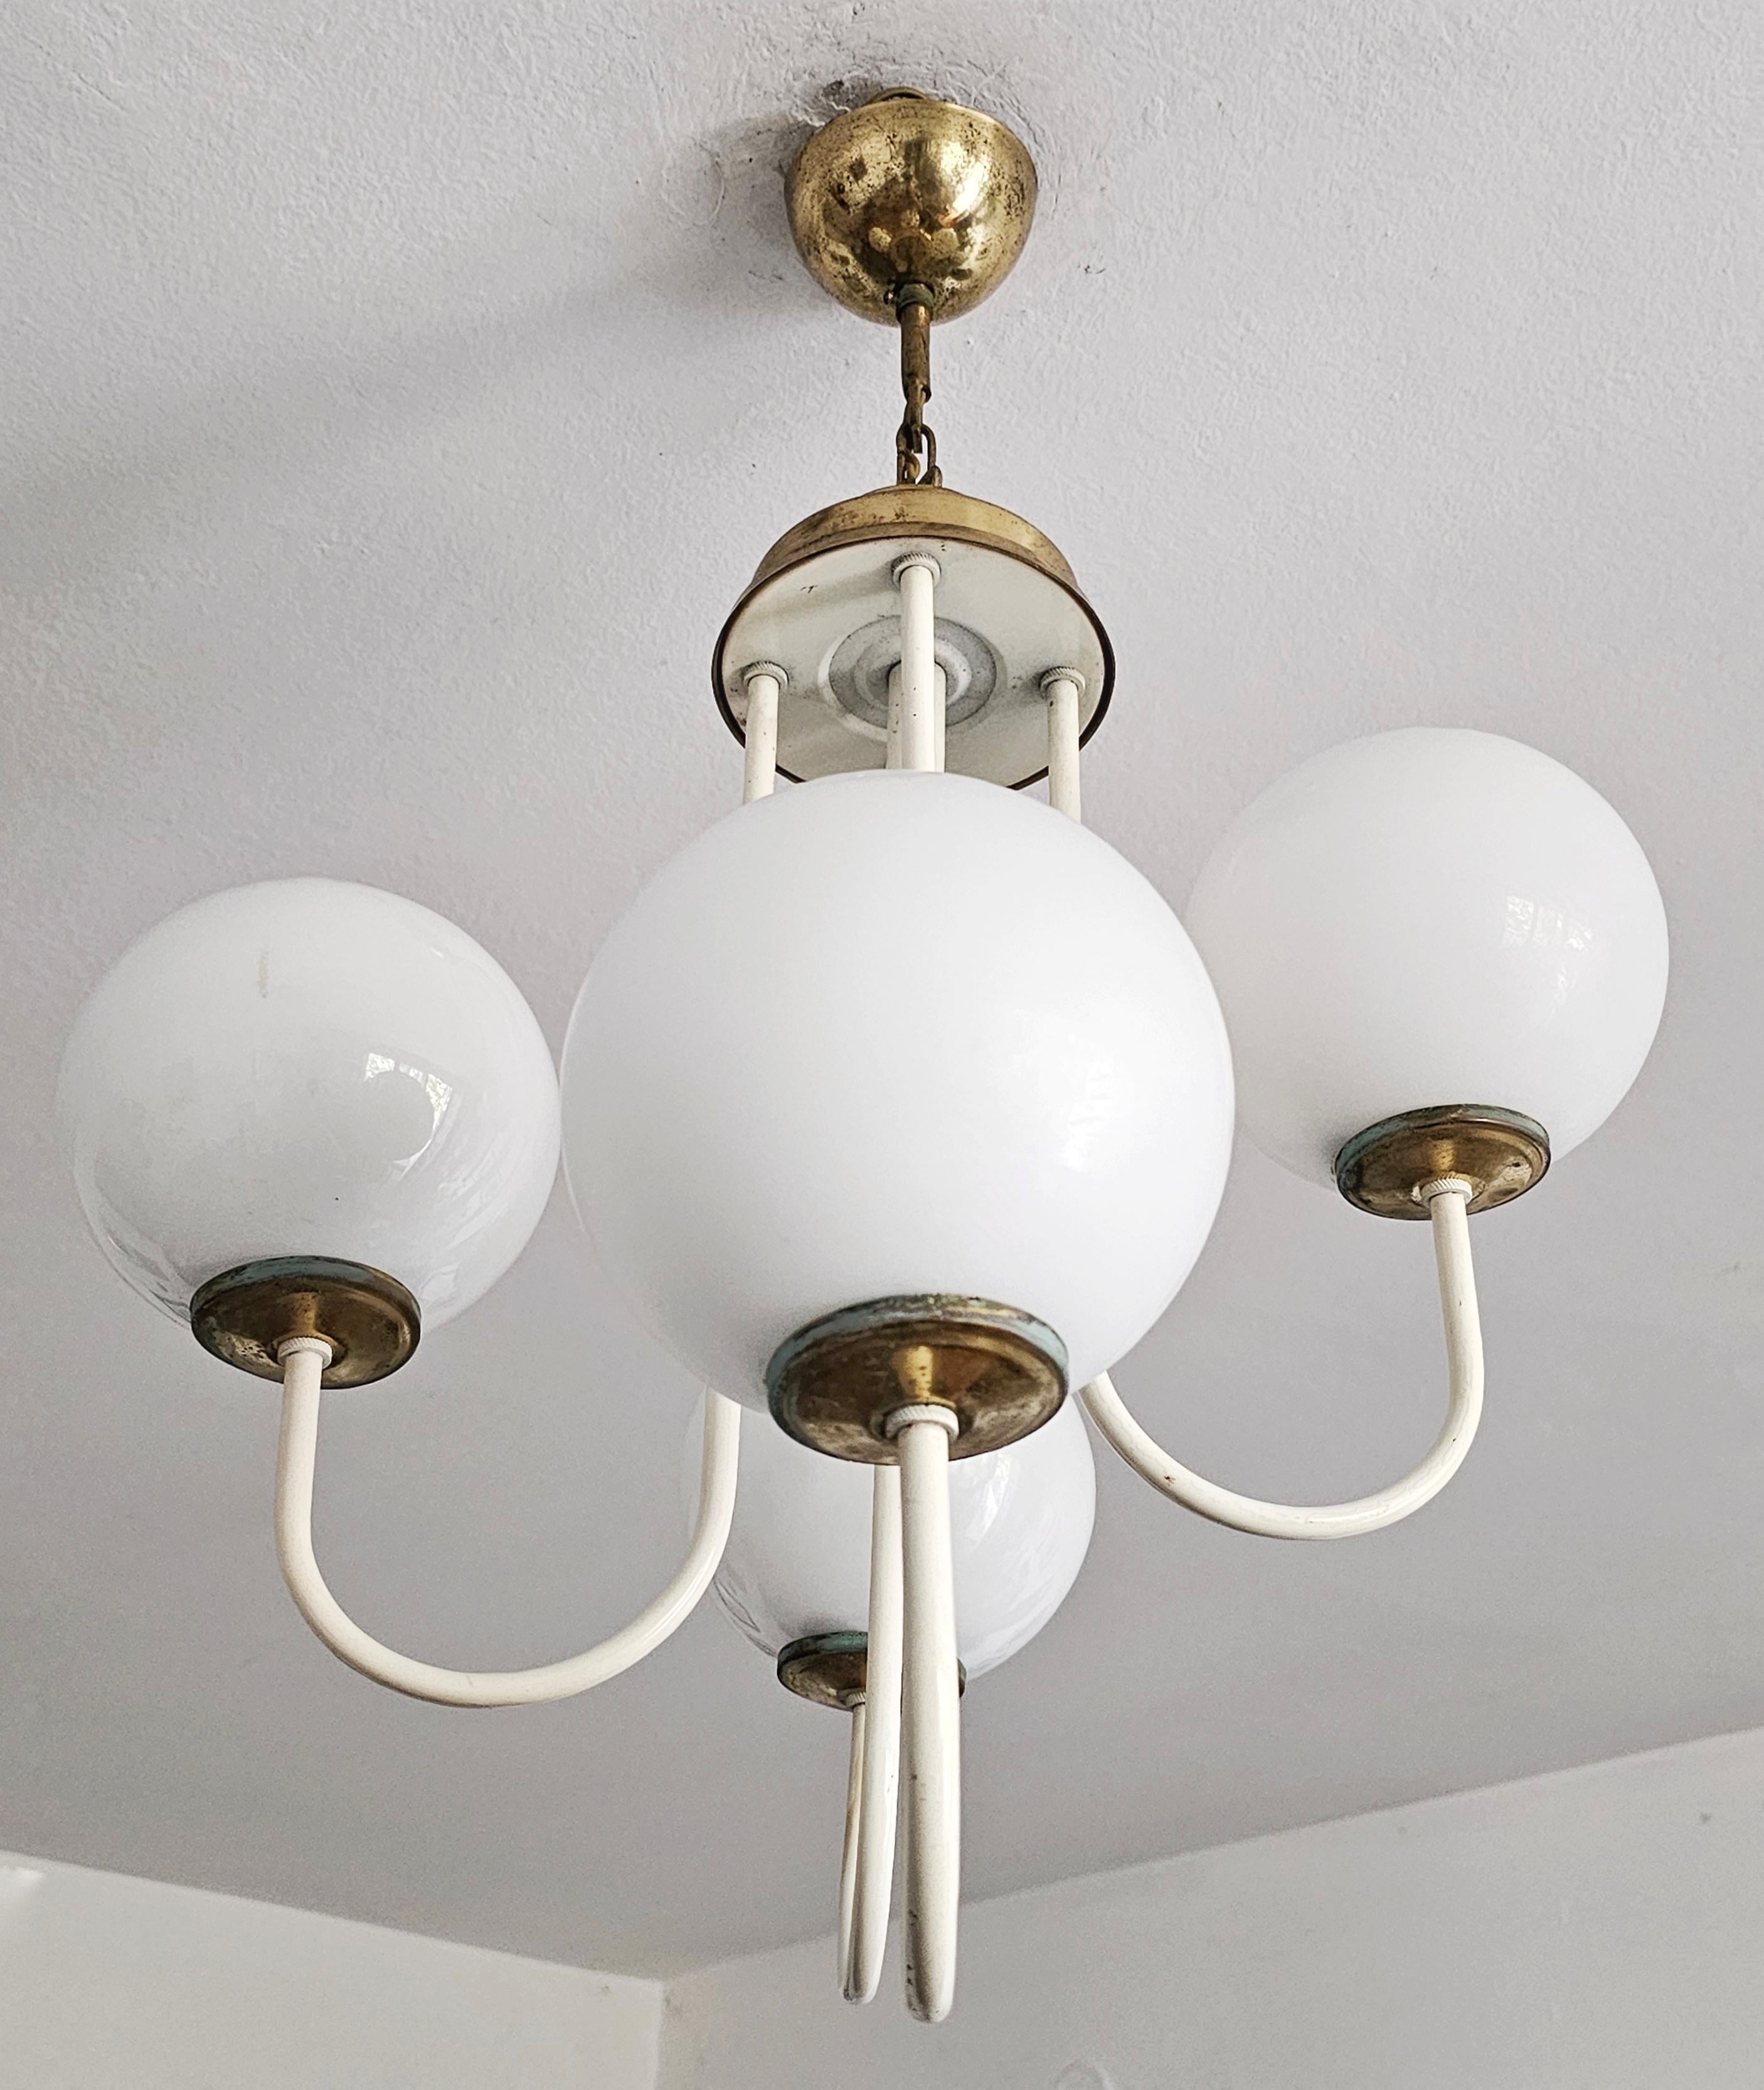 Rare Mid Century Modern Chandelier with Opaline Glass Balls, Italy 1960s For Sale 3